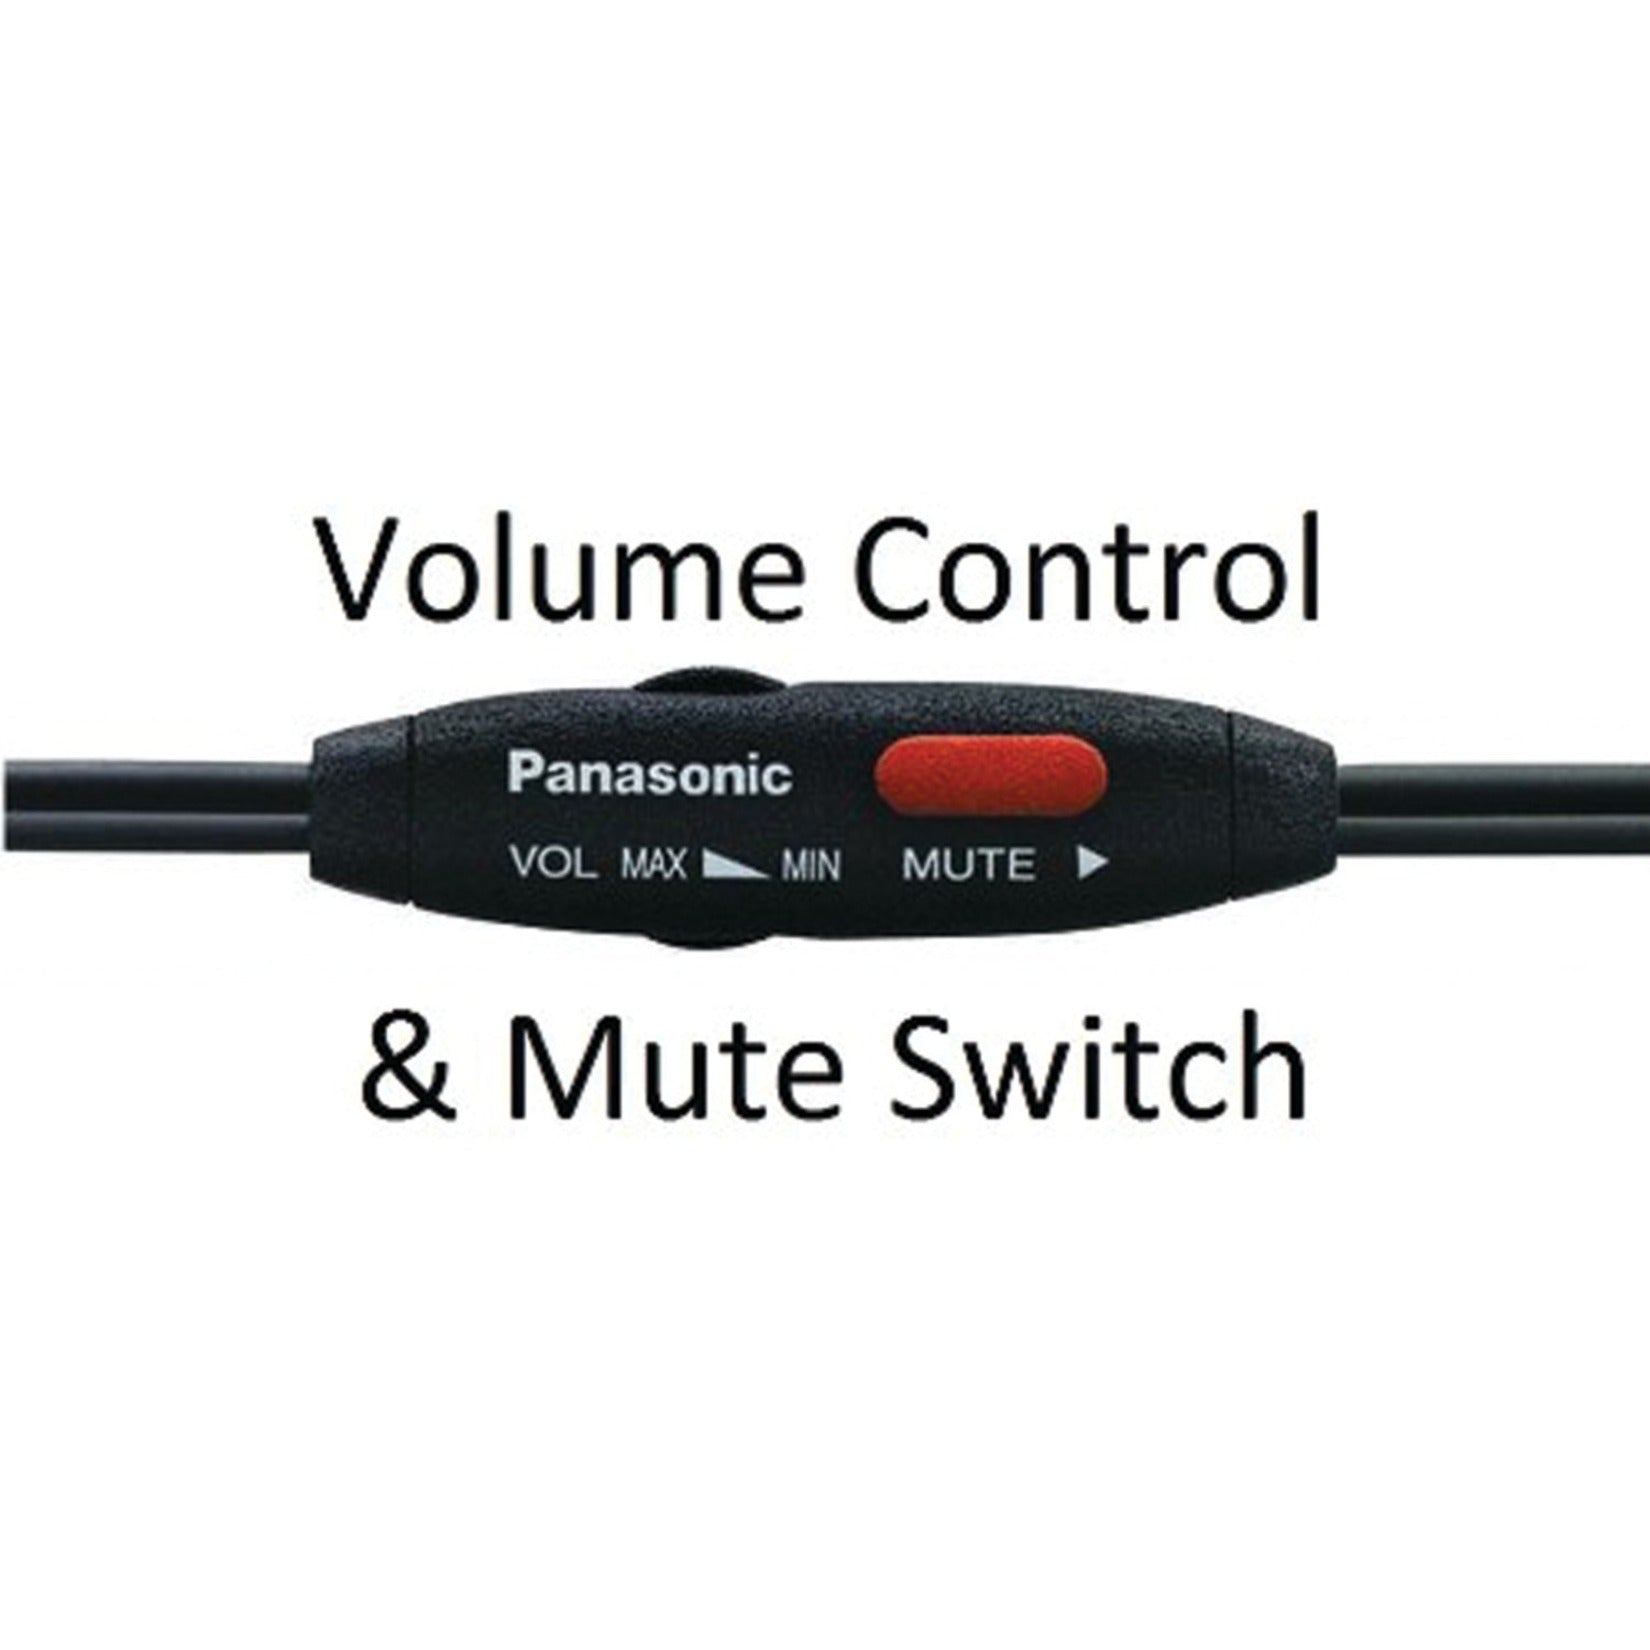 Panasonic KX-TCA430 Headset/Earset, Monaural Over-the-head, Noise Cancelling, 90 Day Warranty